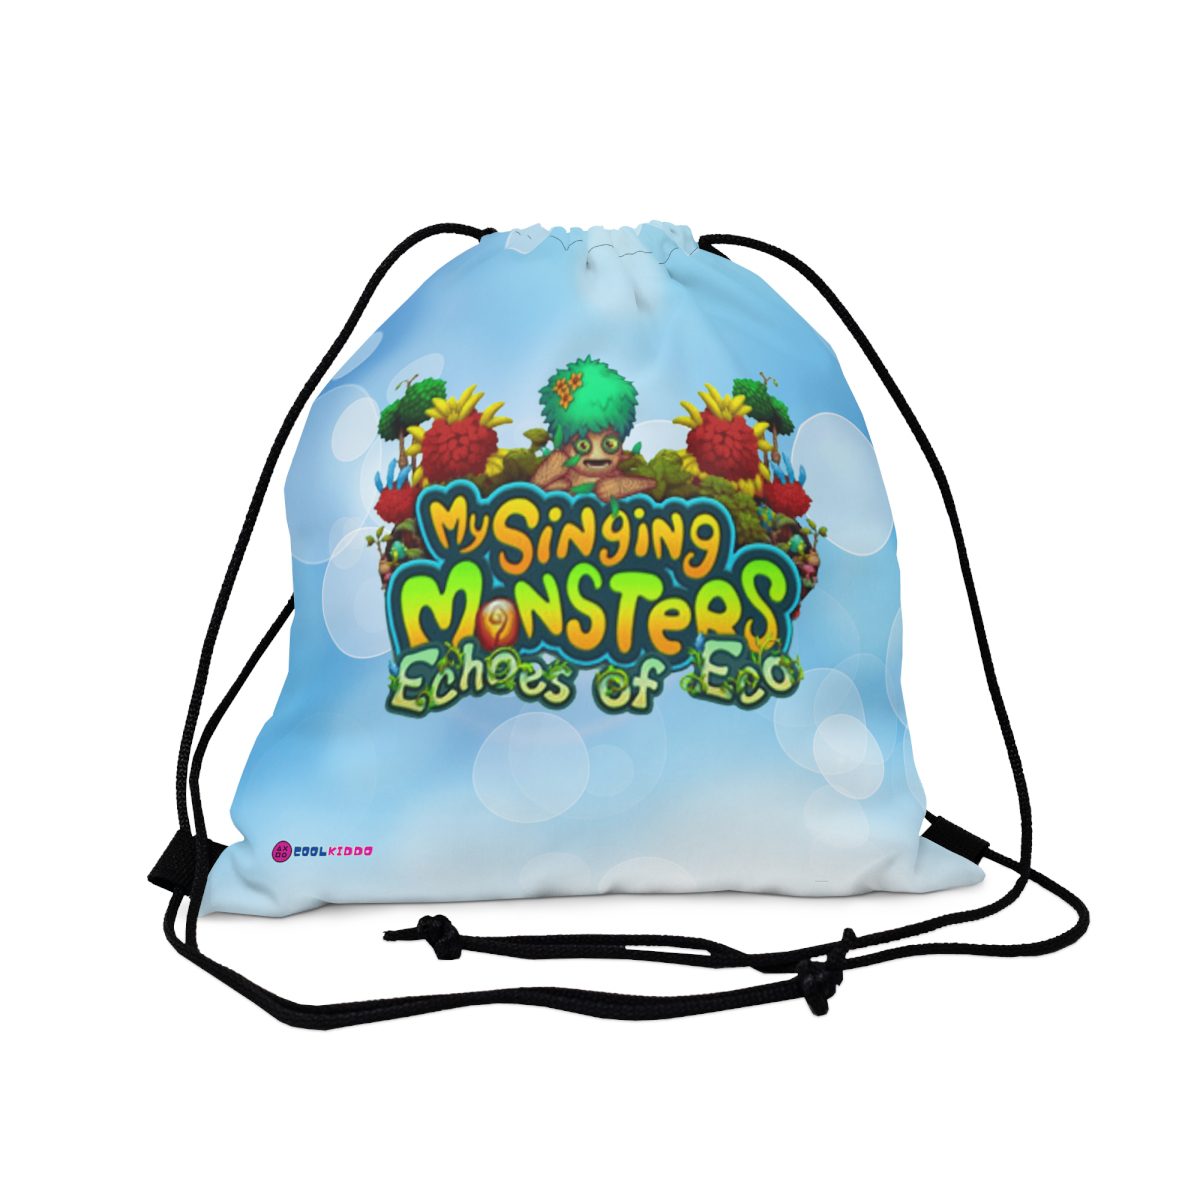 My Singing Monsters Echoes of Eco Blue and Green Drawstring Bag Cool Kiddo 14